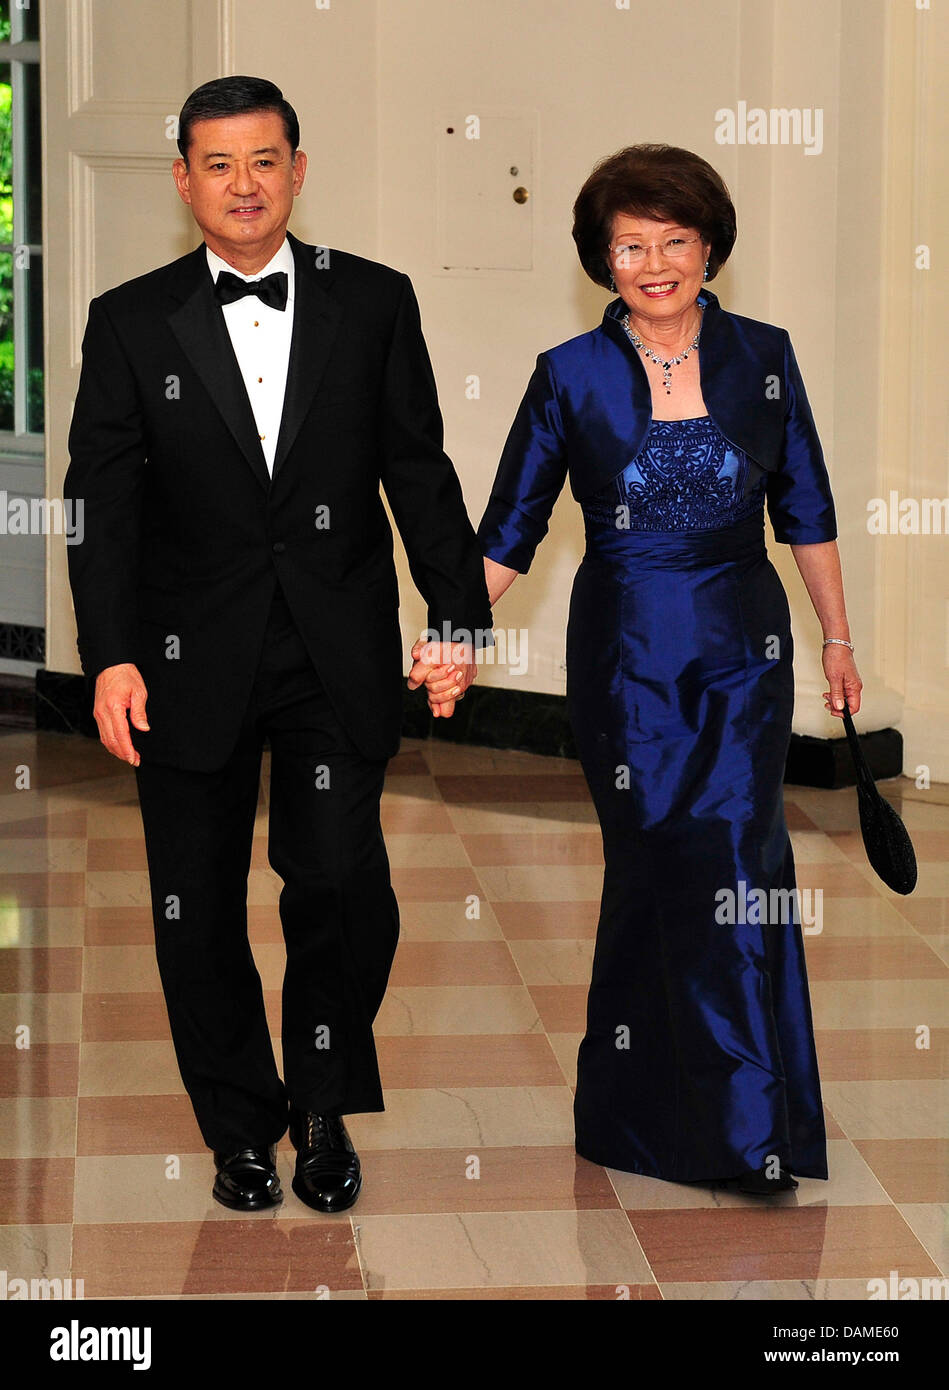 United States Secretary of Veterans Affairs Eric K. Shinseki and his wife, Patty, arrive for a State Dinner in honor of Chancellor Angela Merkel of Germany at the White House in Washington, D.C. on Tuesday, June 7, 2011 Credit: Ron Sachs / CNP Stock Photo